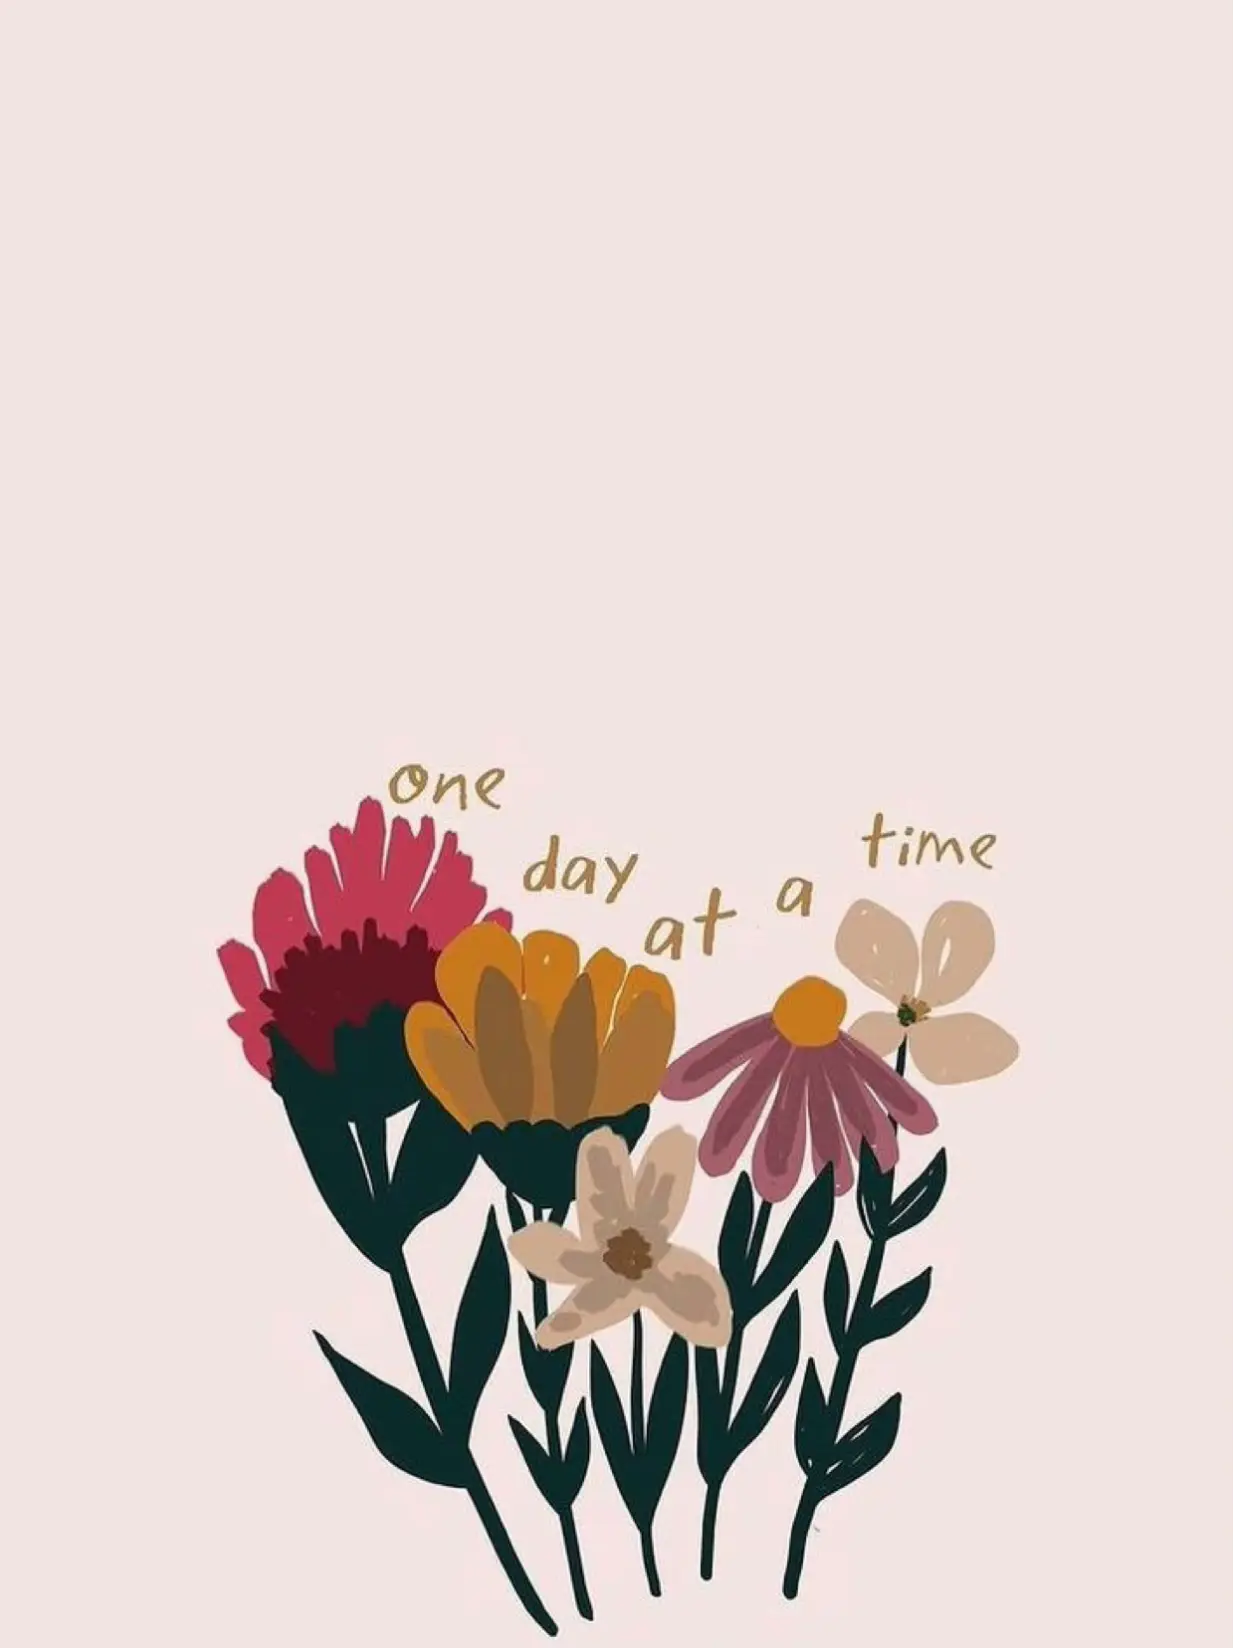  A painting of a bouquet of flowers with the words "Time day at" written below it.